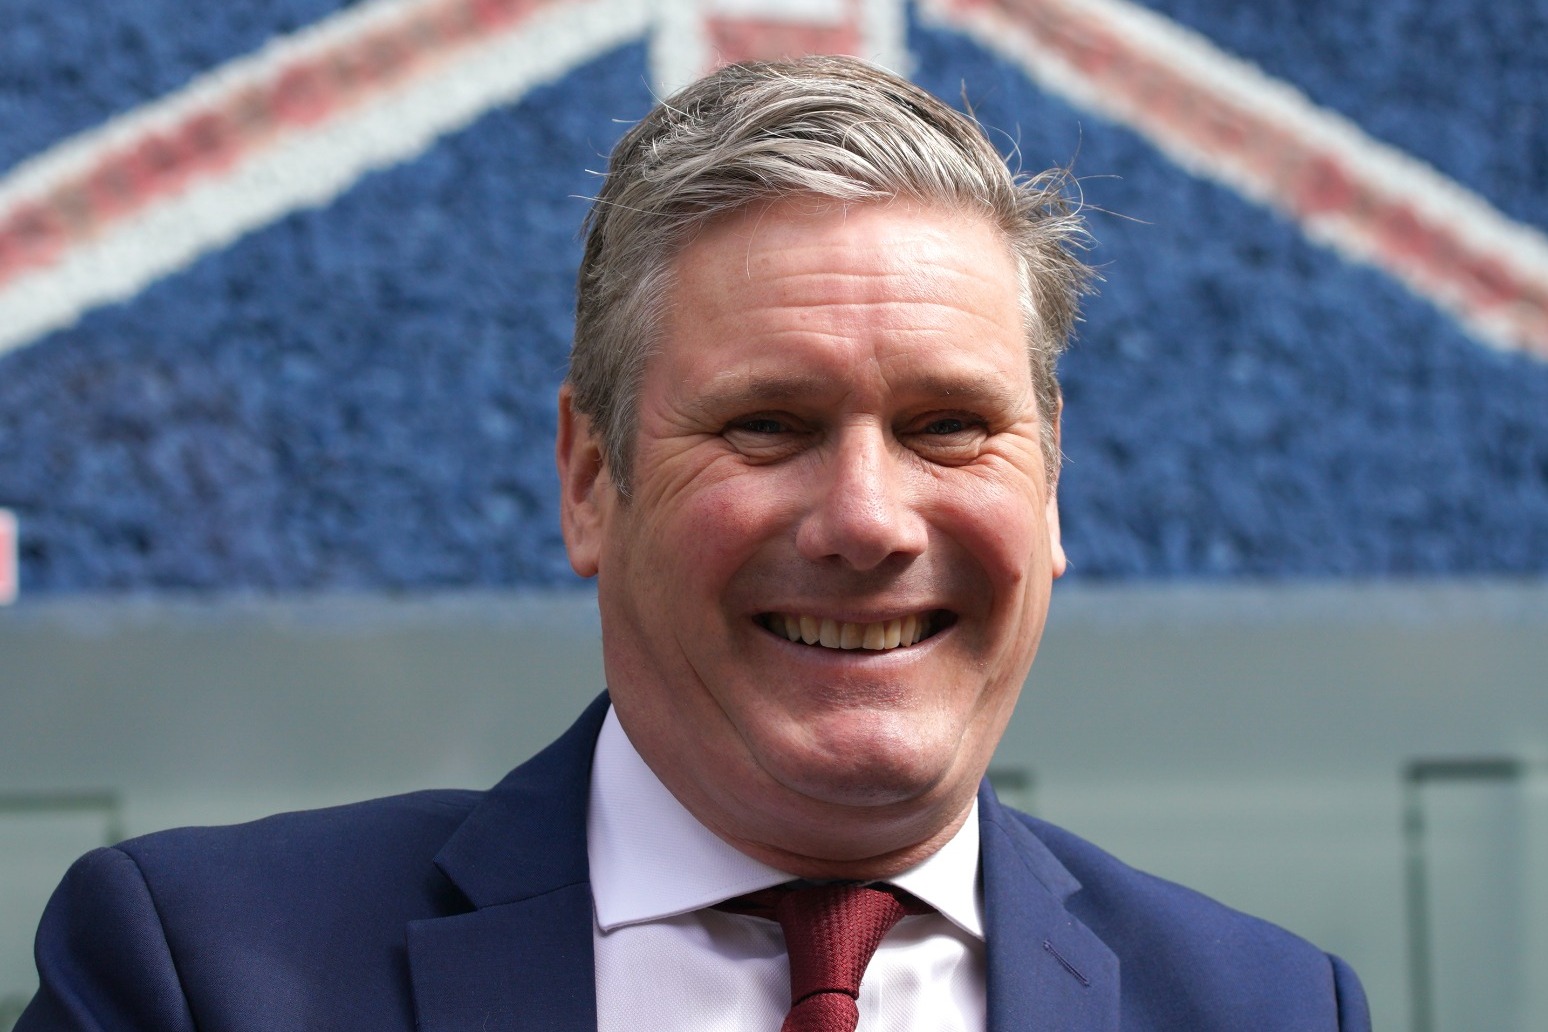 Sir Keir Starmer being investigated over possible breaches of MPs’ rules 